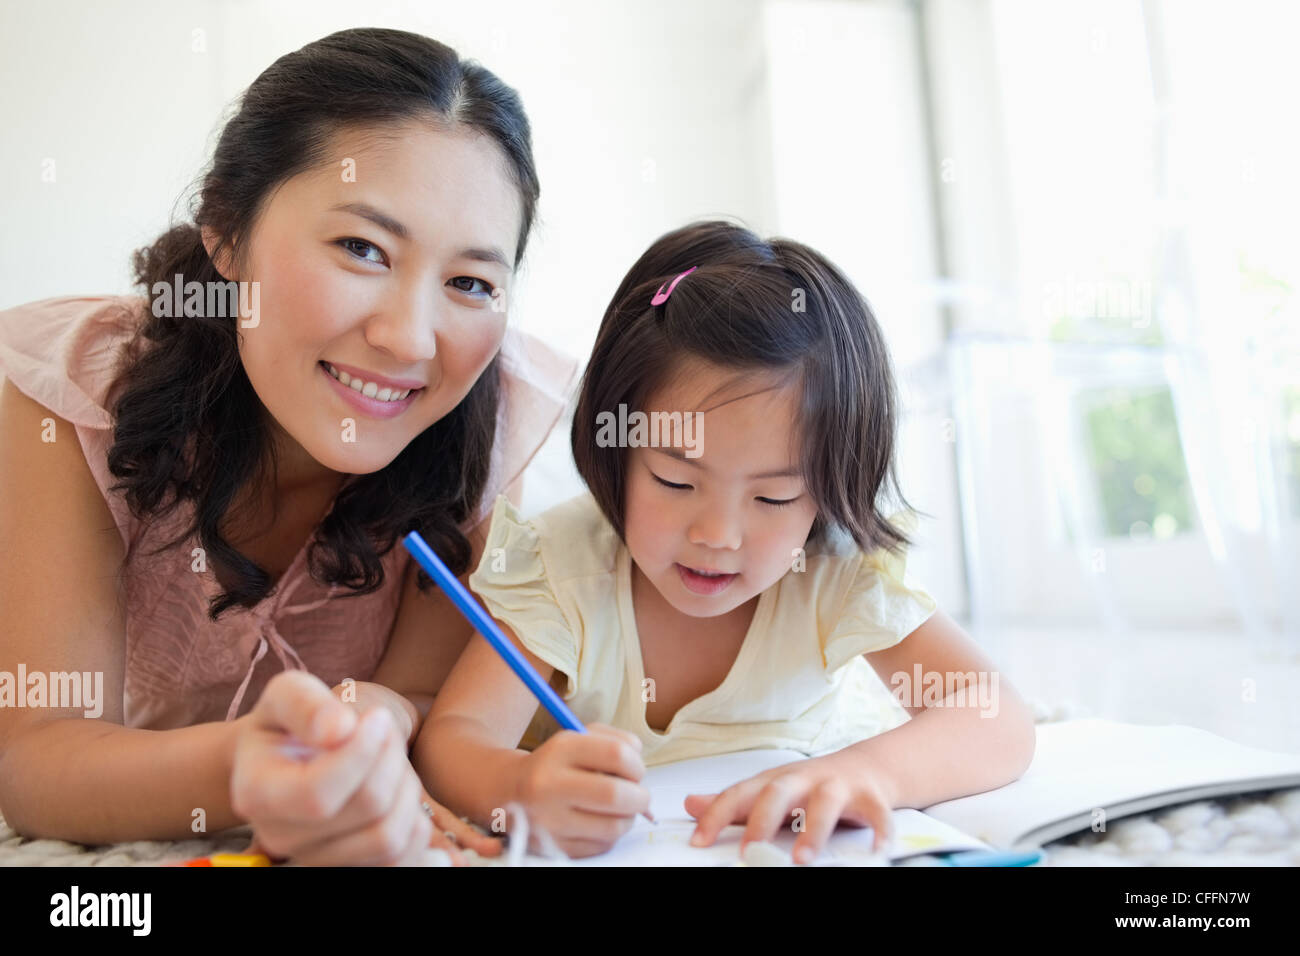 Mother looks ahead as her daughter continues on with colouring Stock Photo